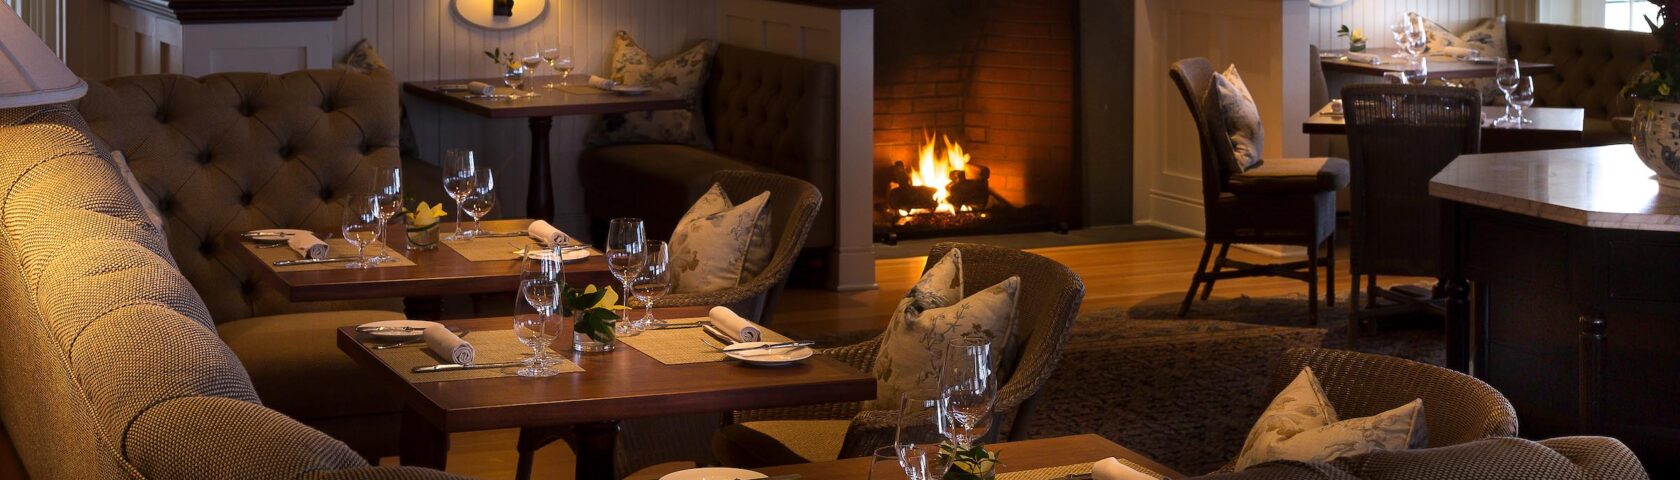 The Bistro dining area with a fireplace.